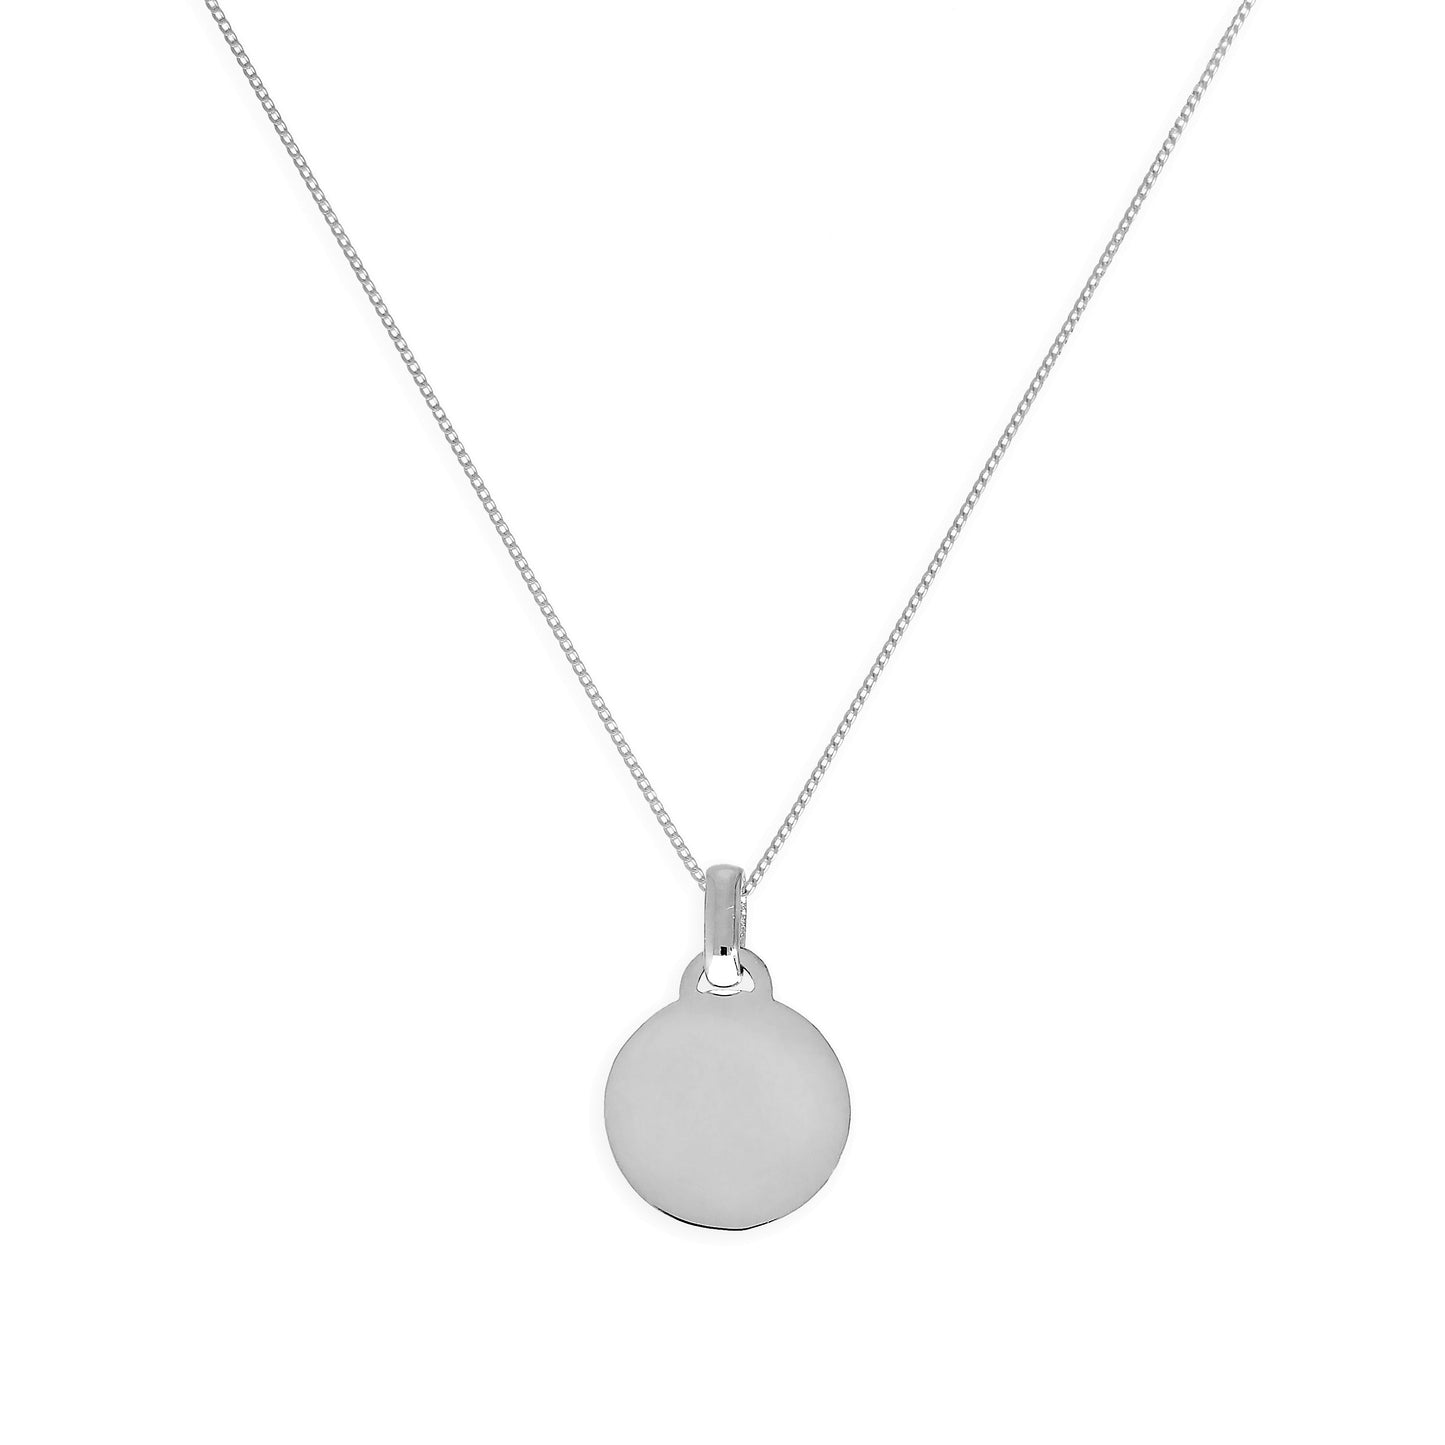 9ct White Gold Small Engravable Circle Pendant Necklace 16 - 20 Inches